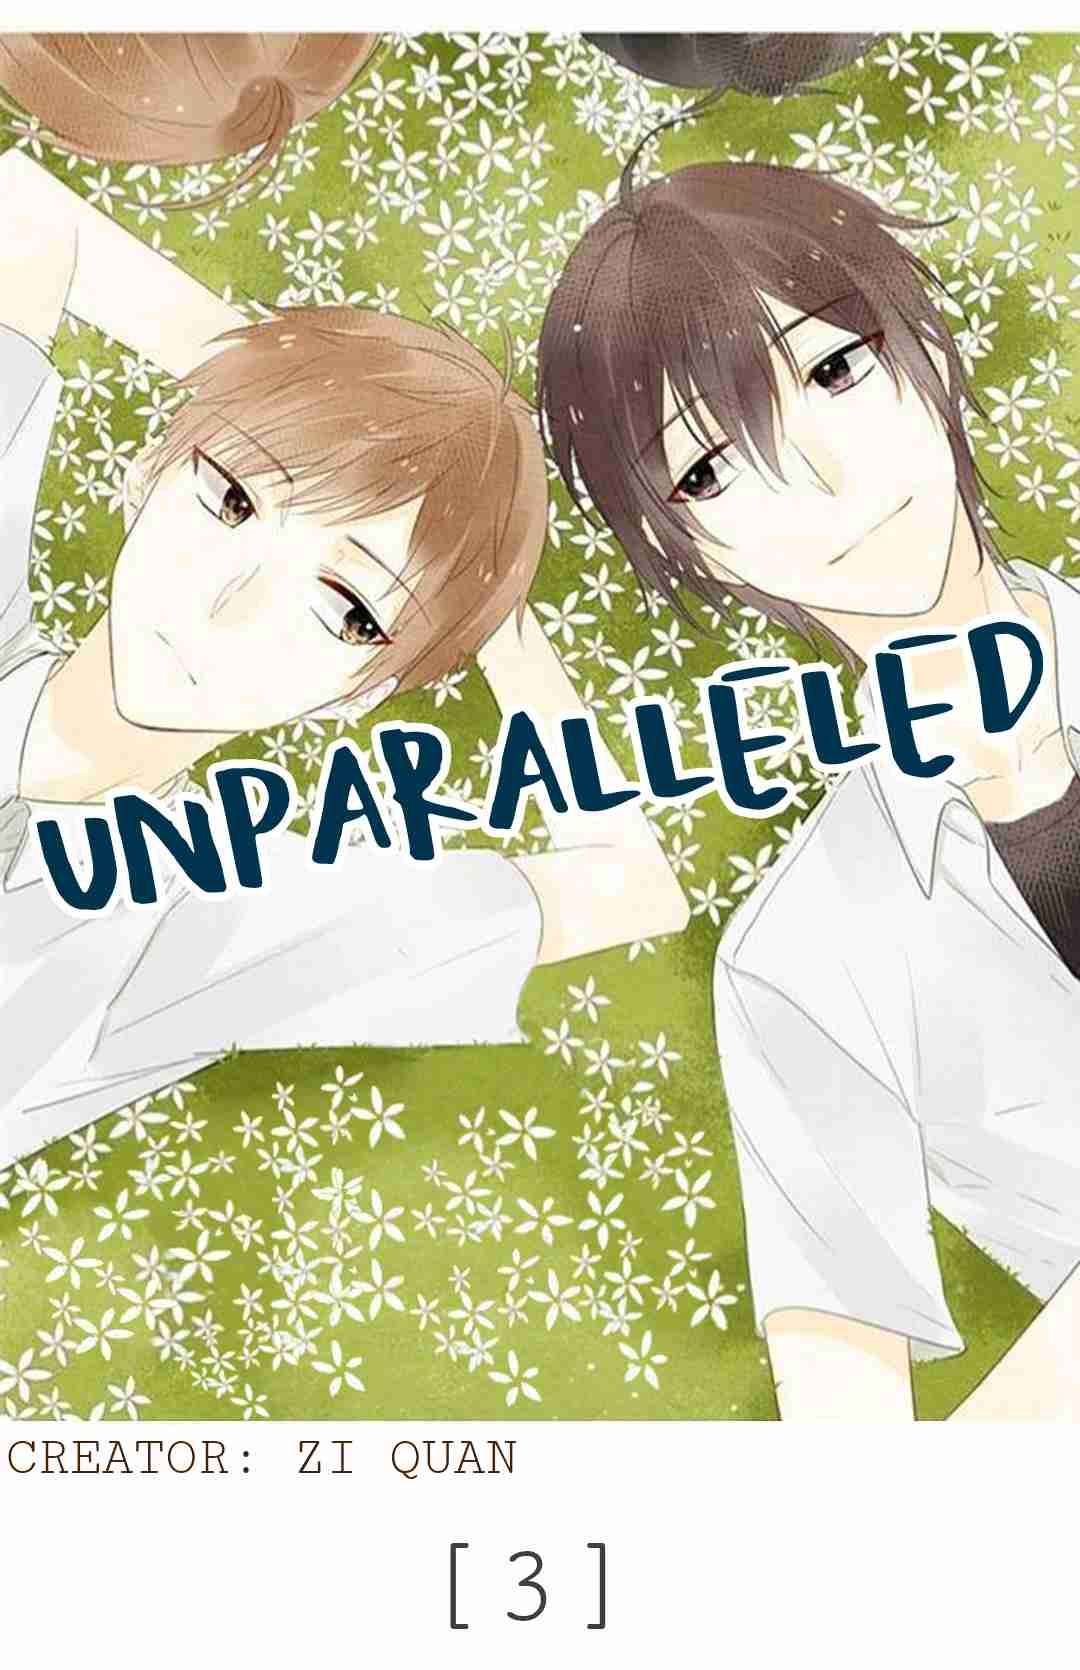 Unparalleled Vol. 1 Ch. 3